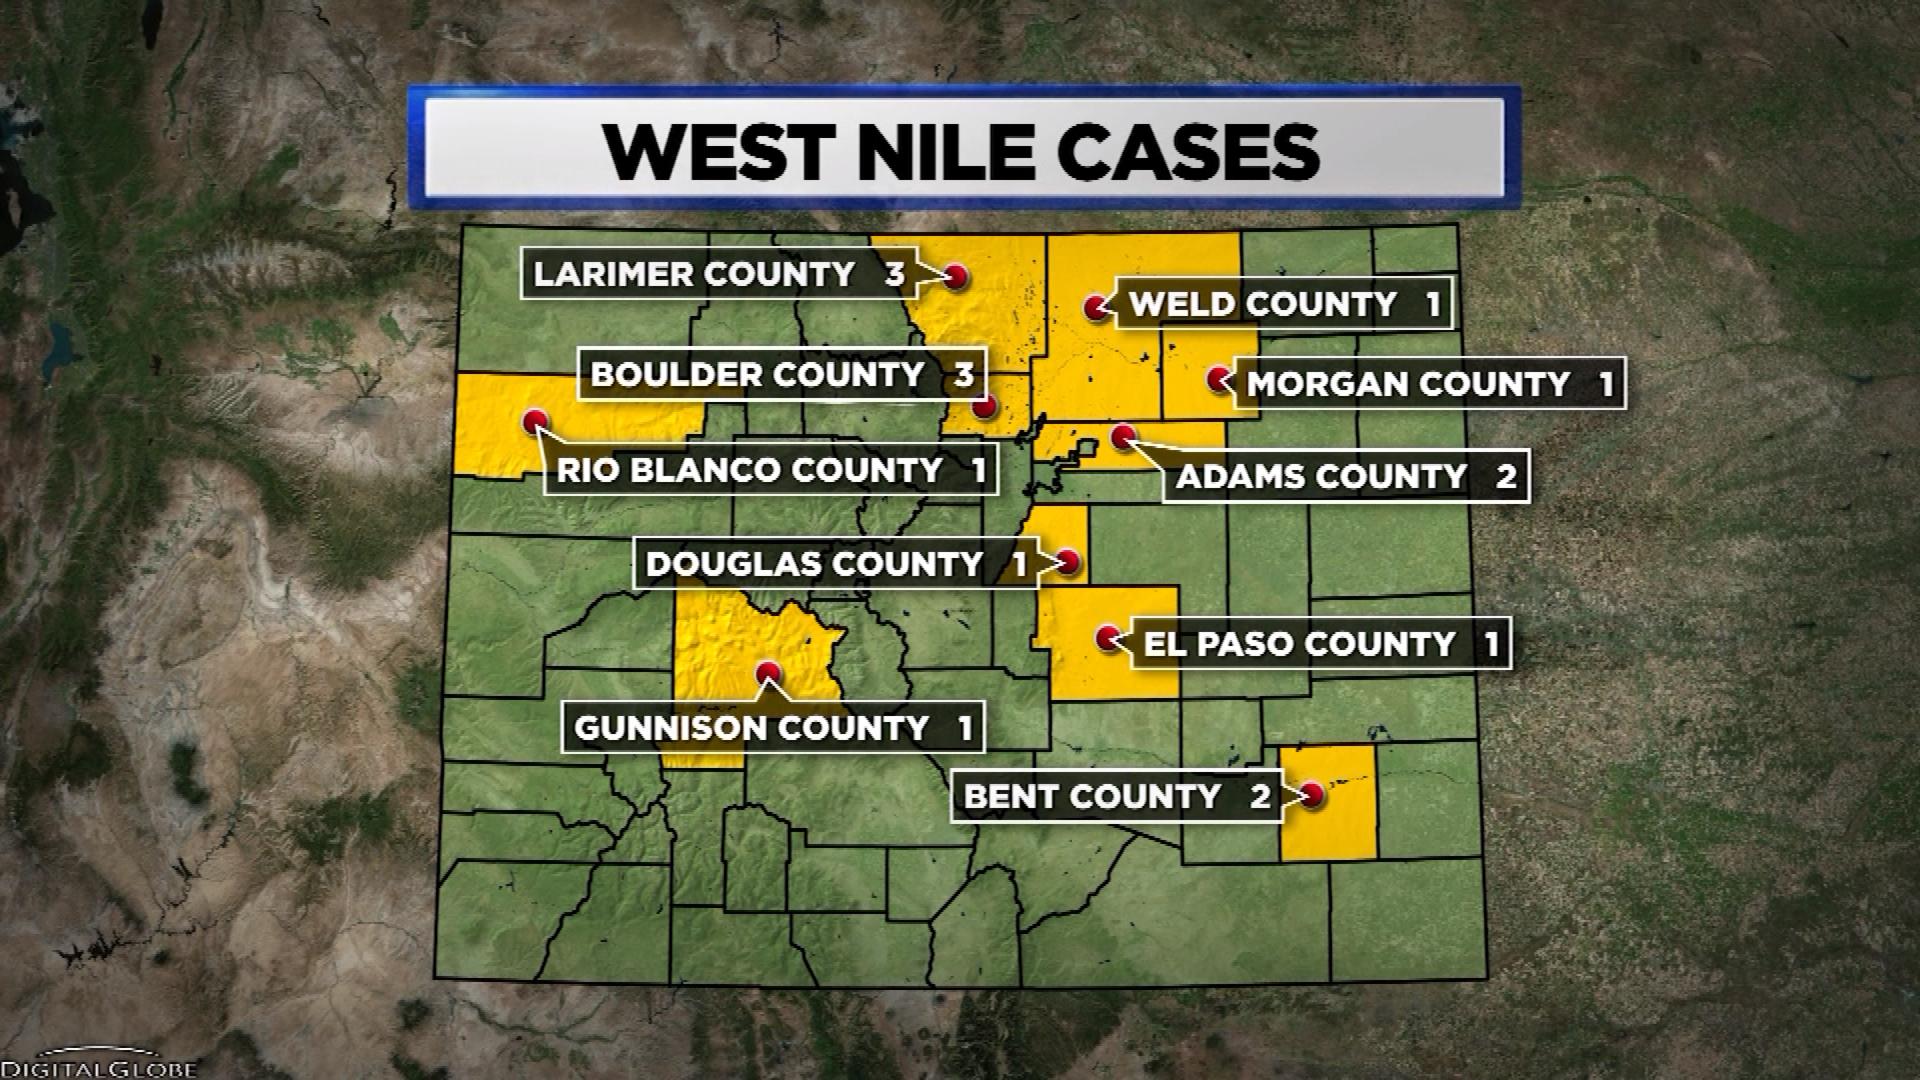 WEST NILE CASES map